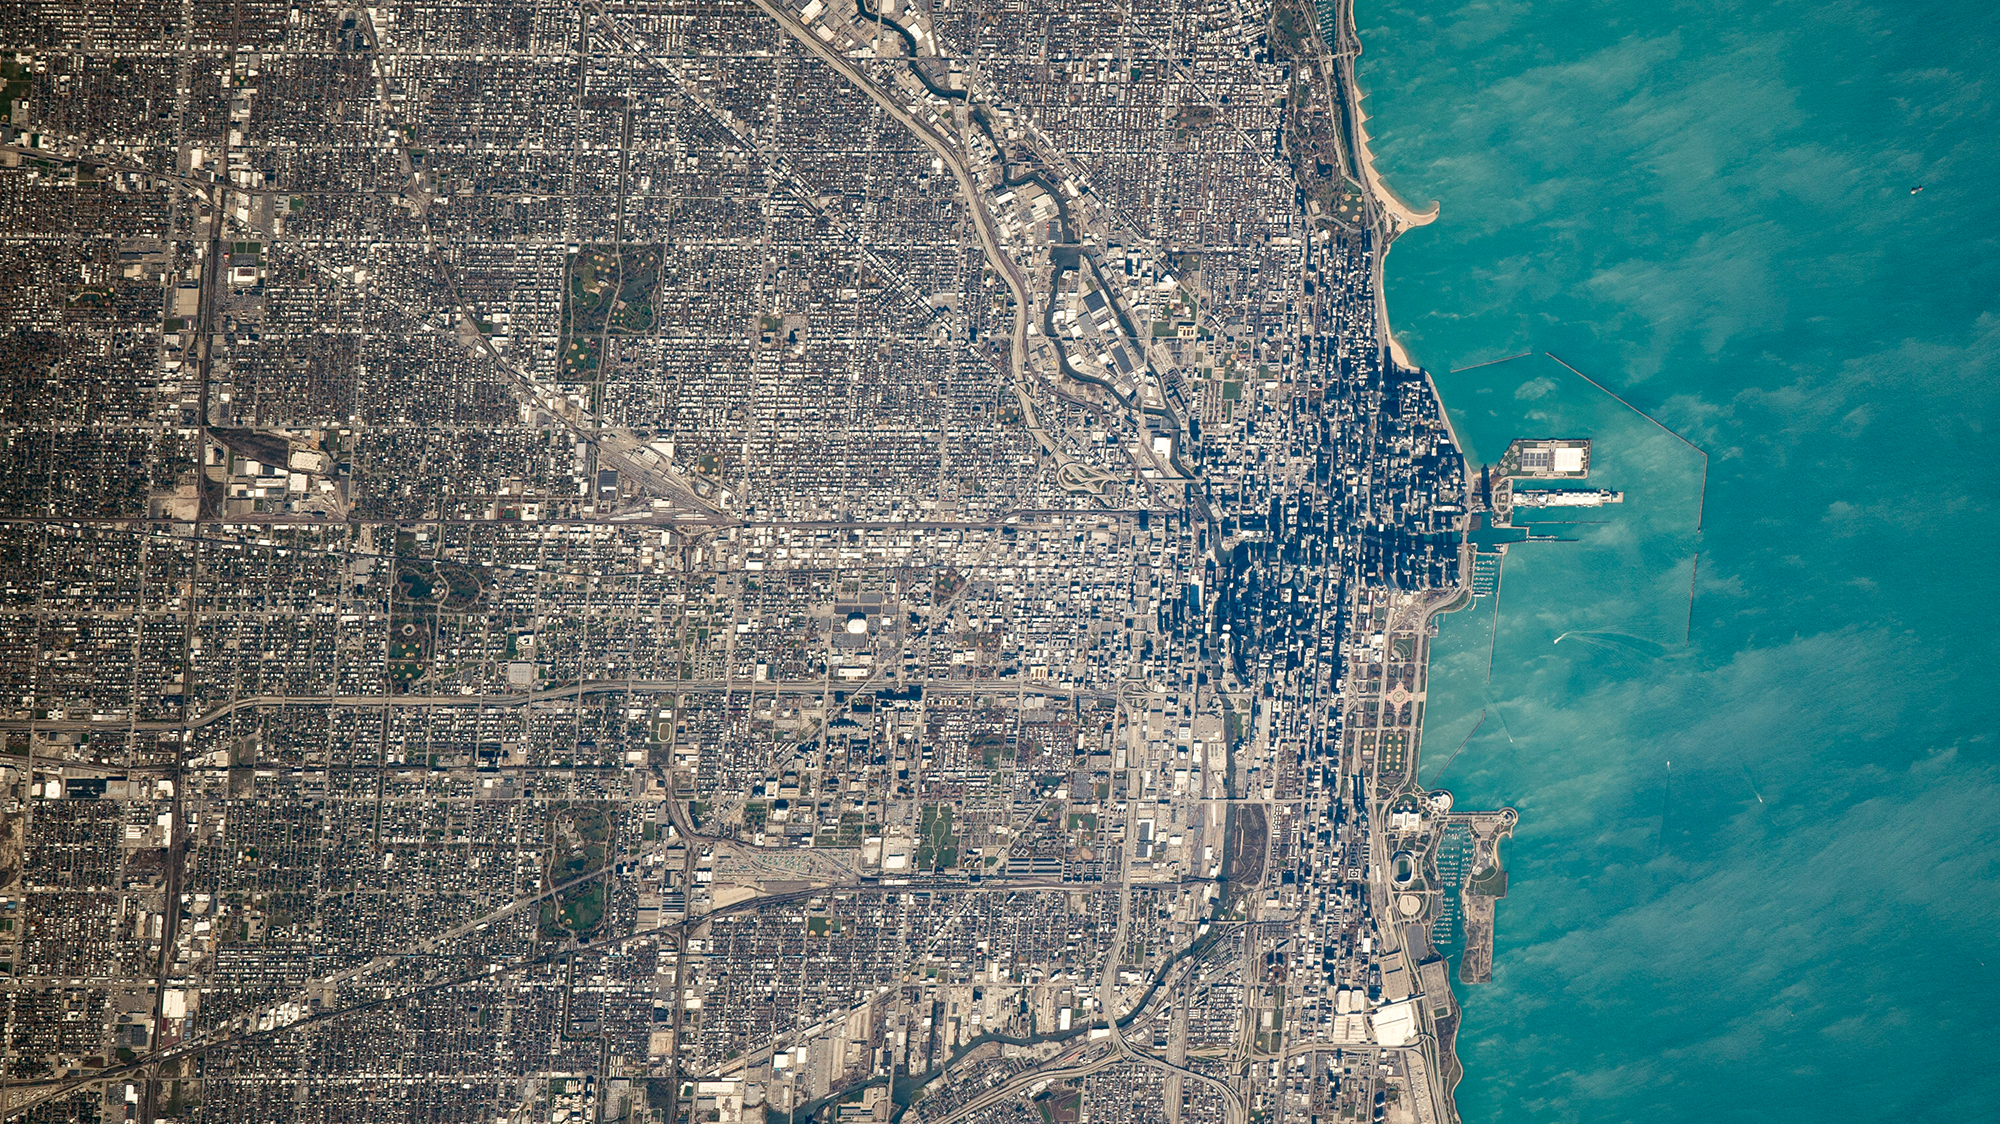 NASA image of the Chicago region from space.